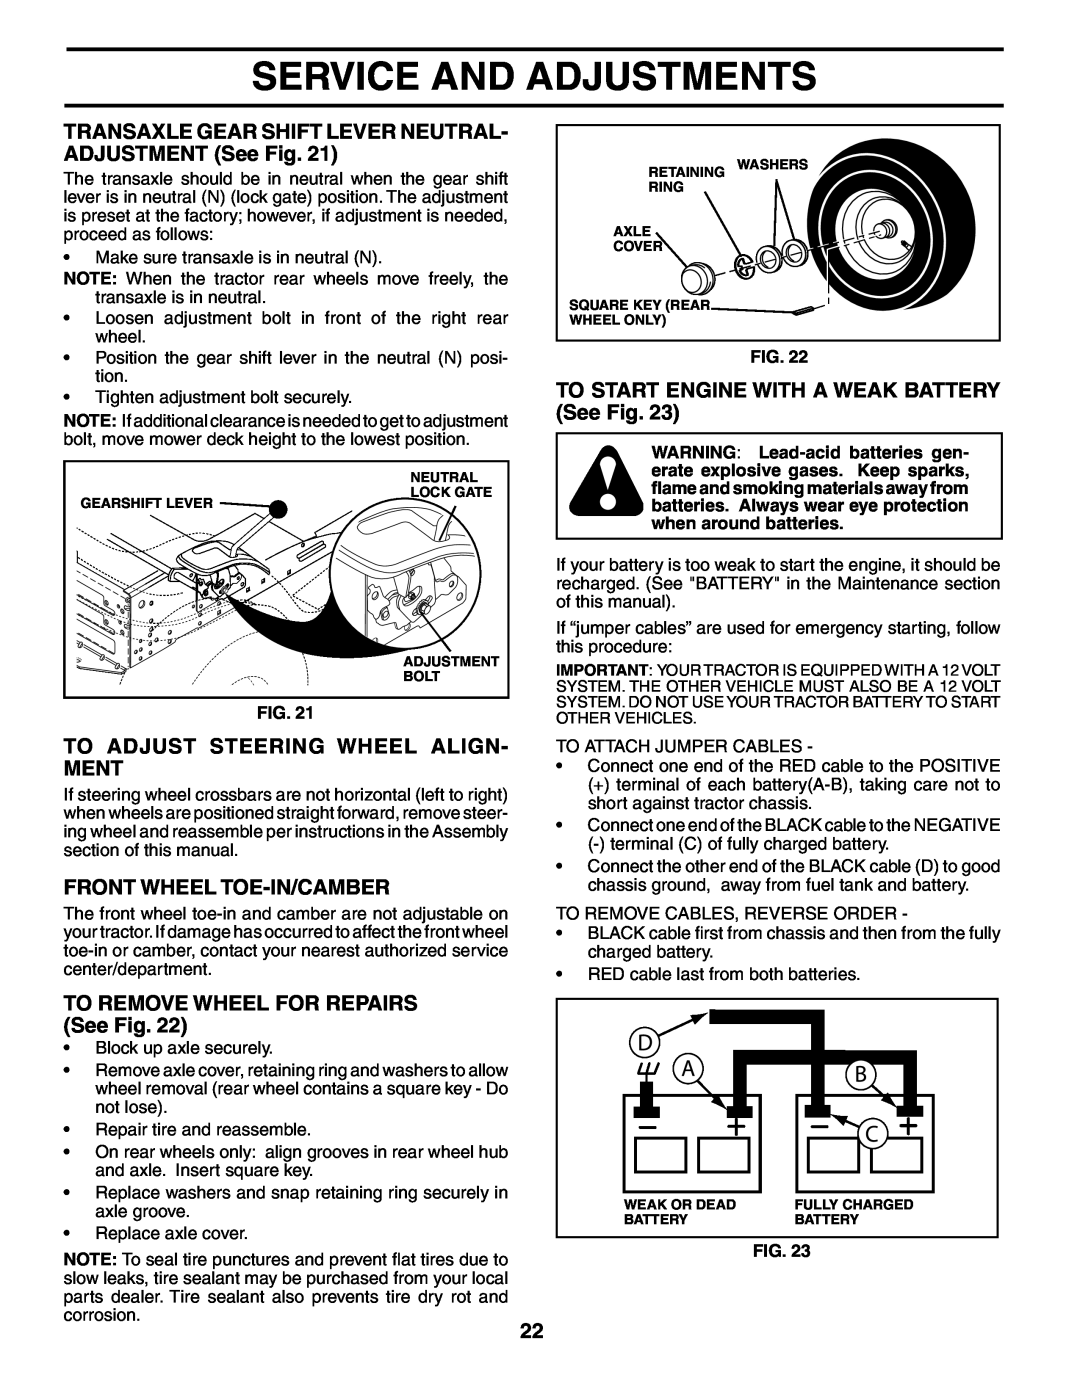 Poulan WE13538LT To Adjust Steering Wheel Align- Ment, Front Wheel Toe-In/Camber, TO REMOVE WHEEL FOR REPAIRS See Fig 